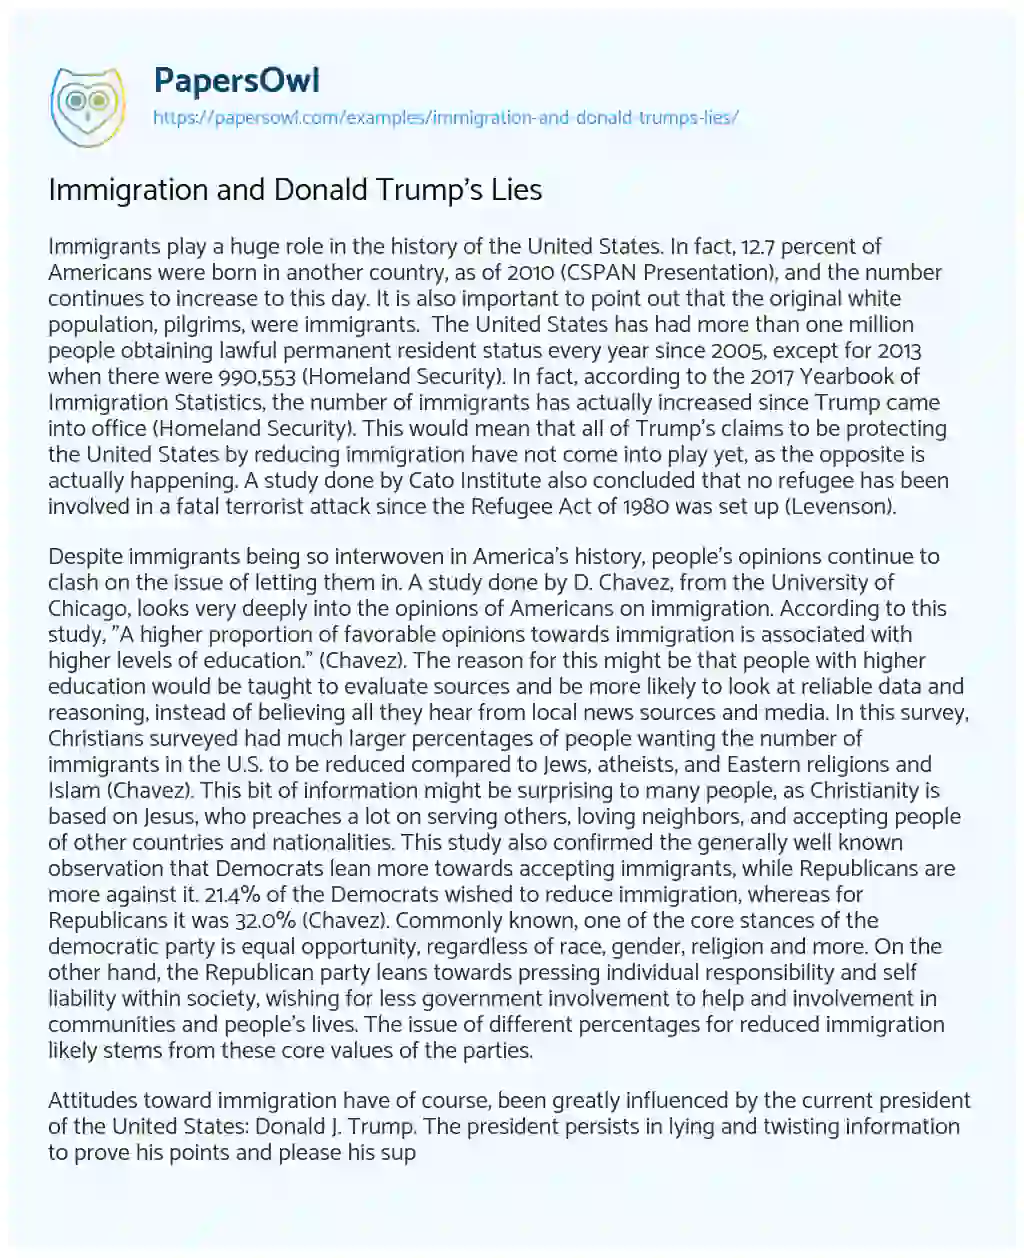 Essay on Immigration and Donald Trump’s Lies